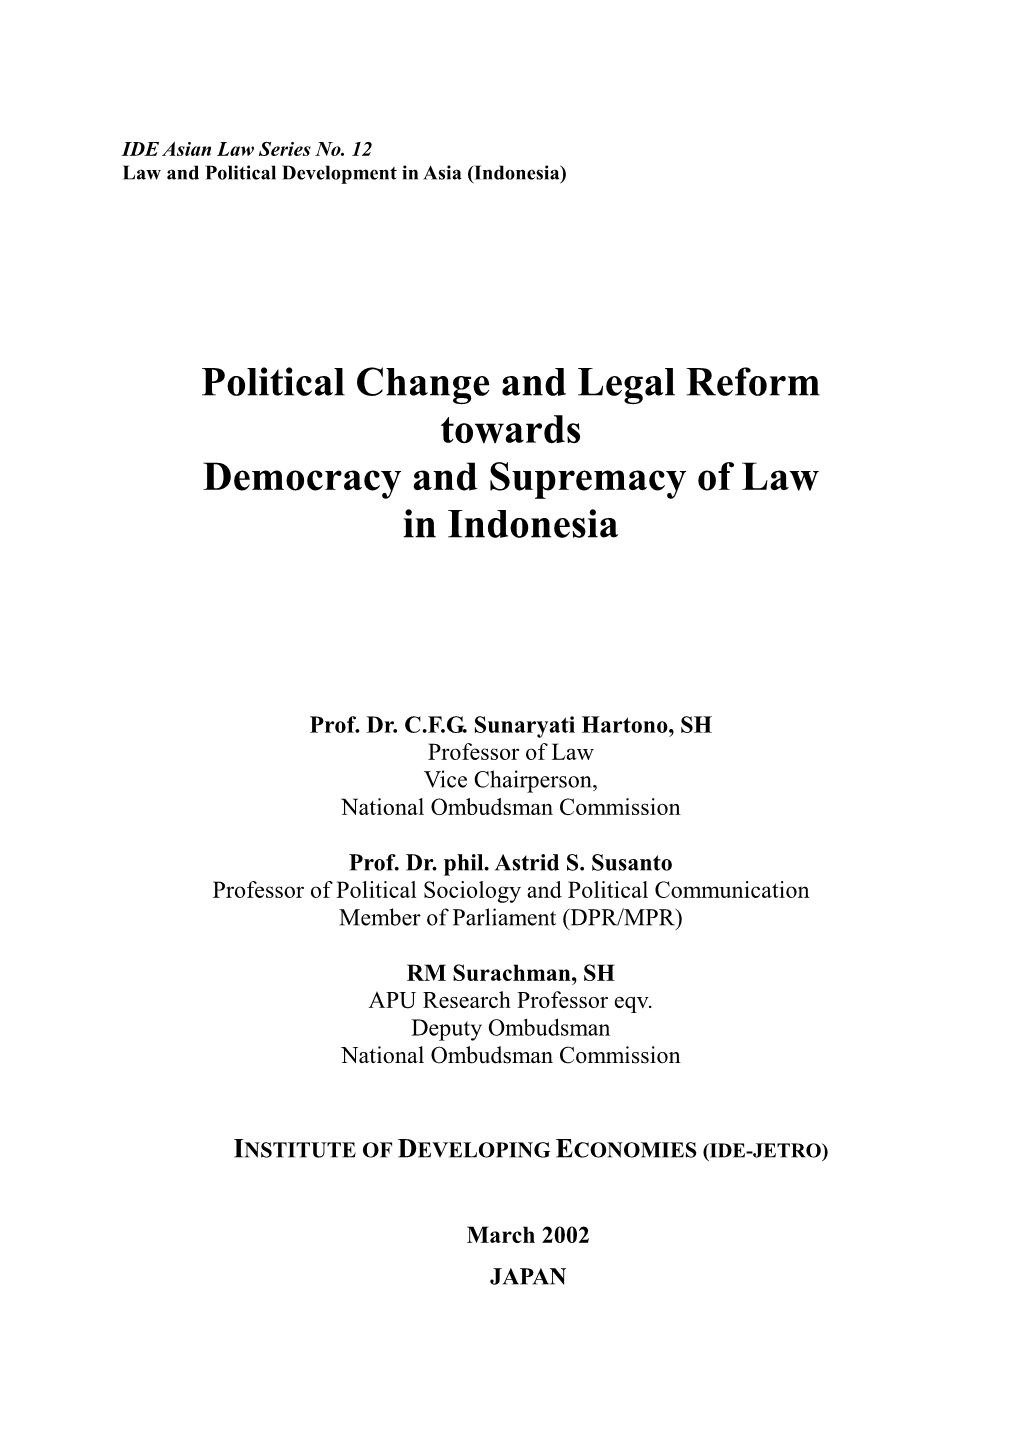 Political Change and Legal Reform Towards Democracy and Supremacy of Law in Indonesia